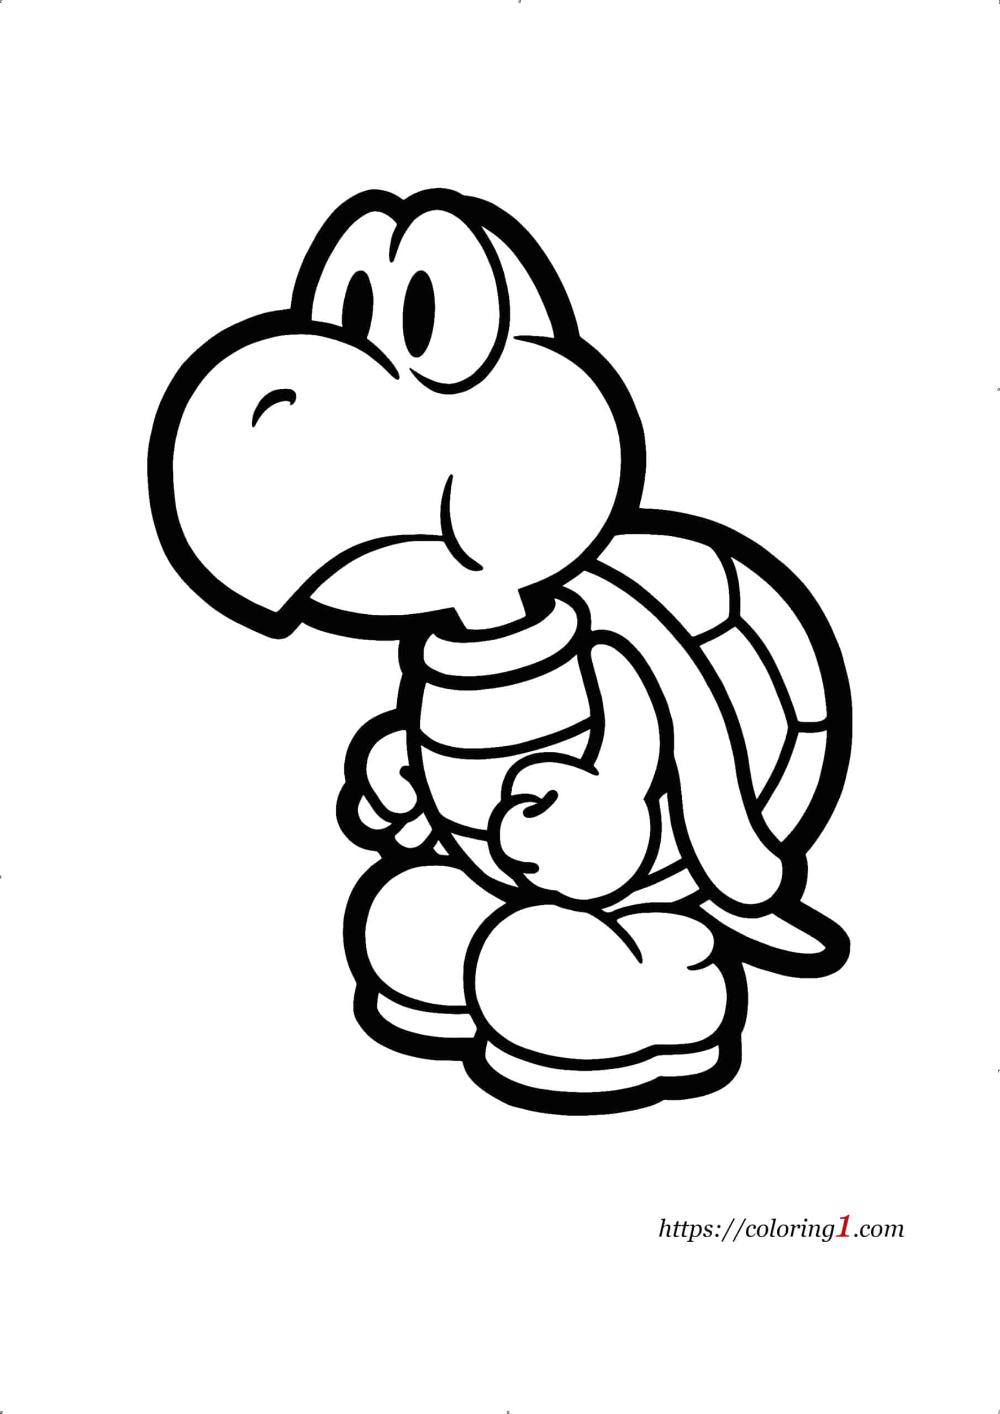 Mario Koopa Troopa Coloring Pages - 2 Free Coloring Sheets (2021) | Mario coloring  pages, Super mario coloring pages, Coloring pages